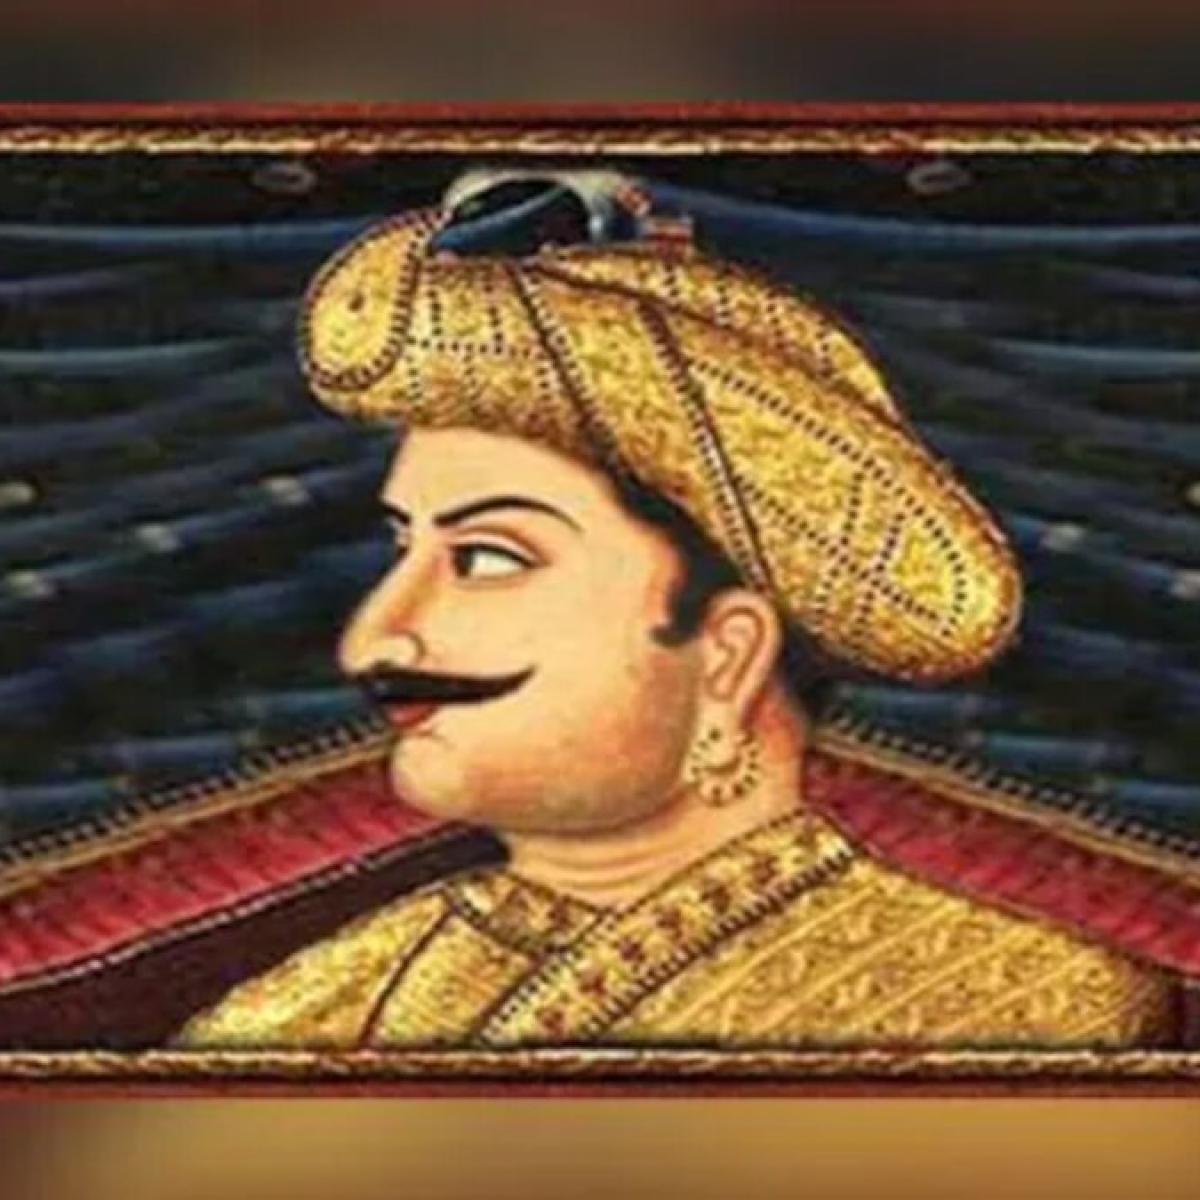 descendants of tipu sultan and their current plight! - paradox indeed 